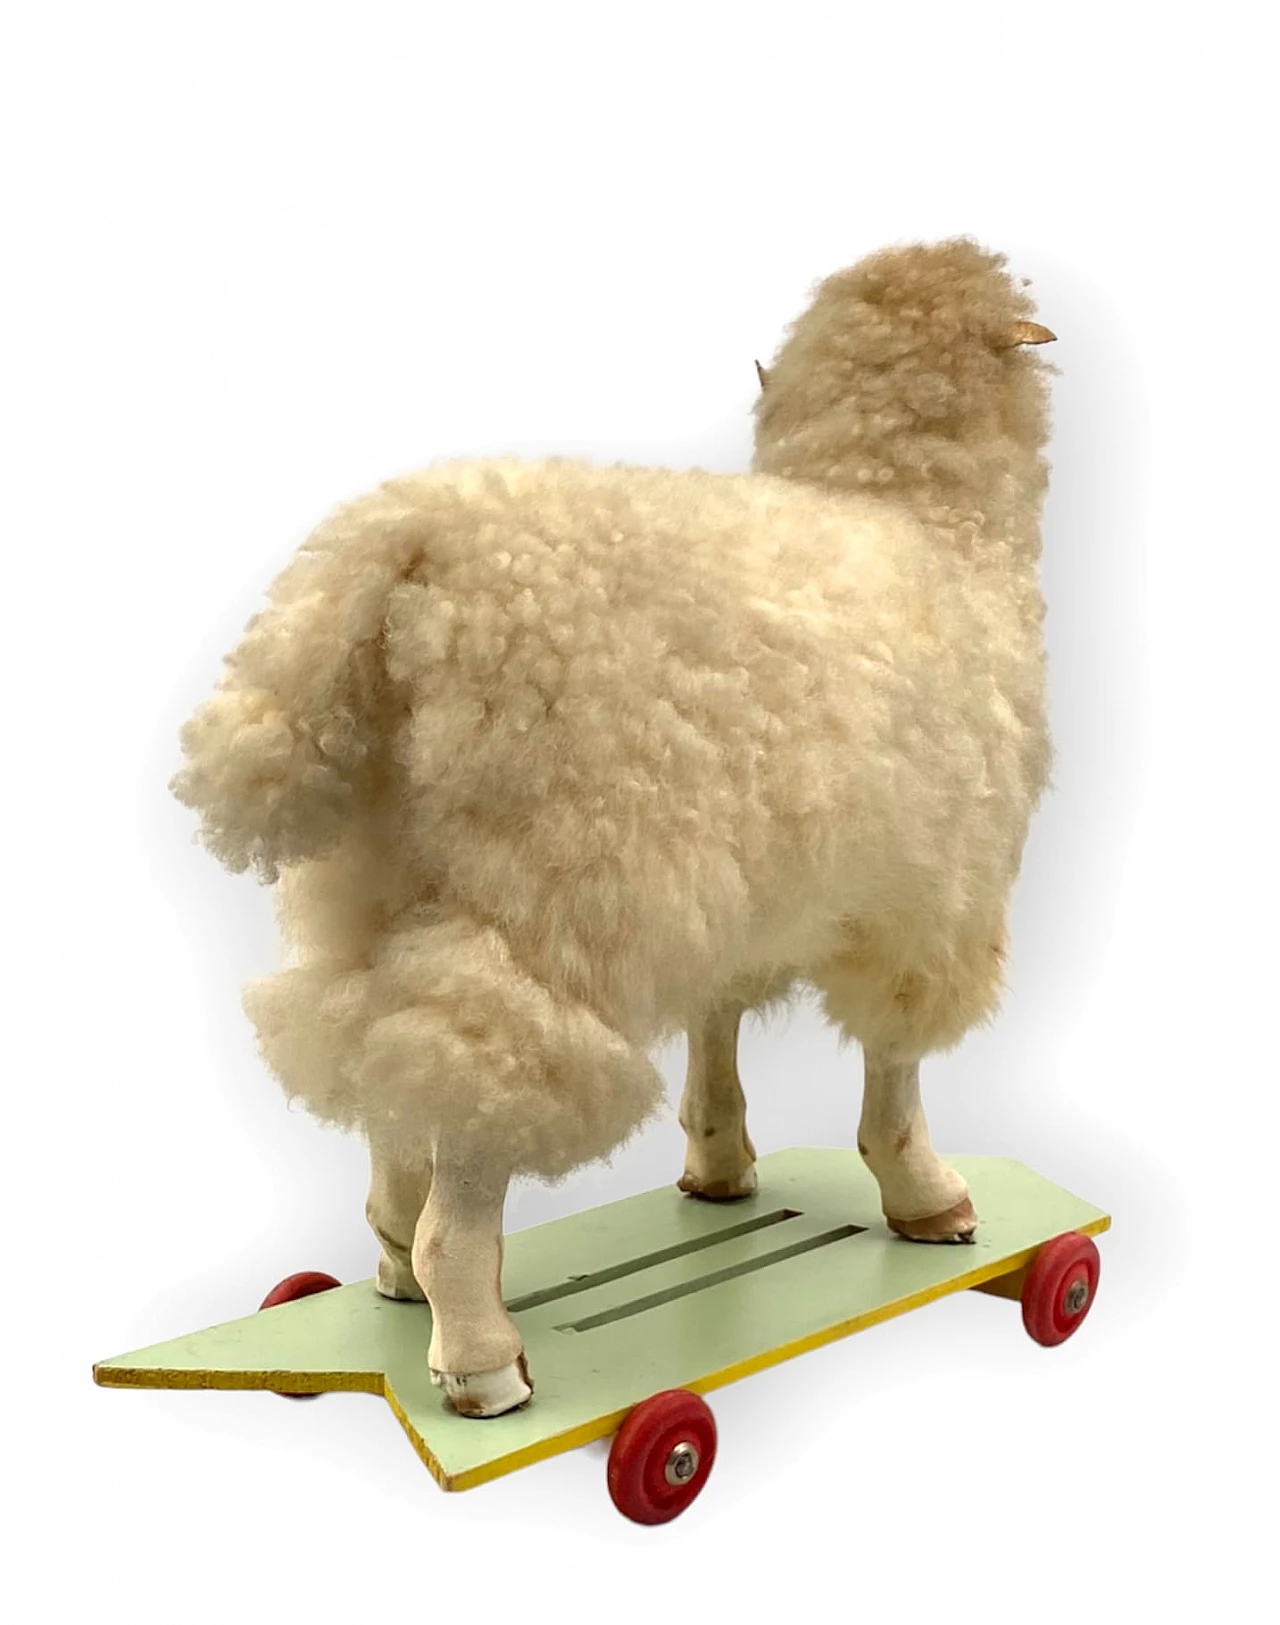 Wool and wood toy sheep with wheels 16